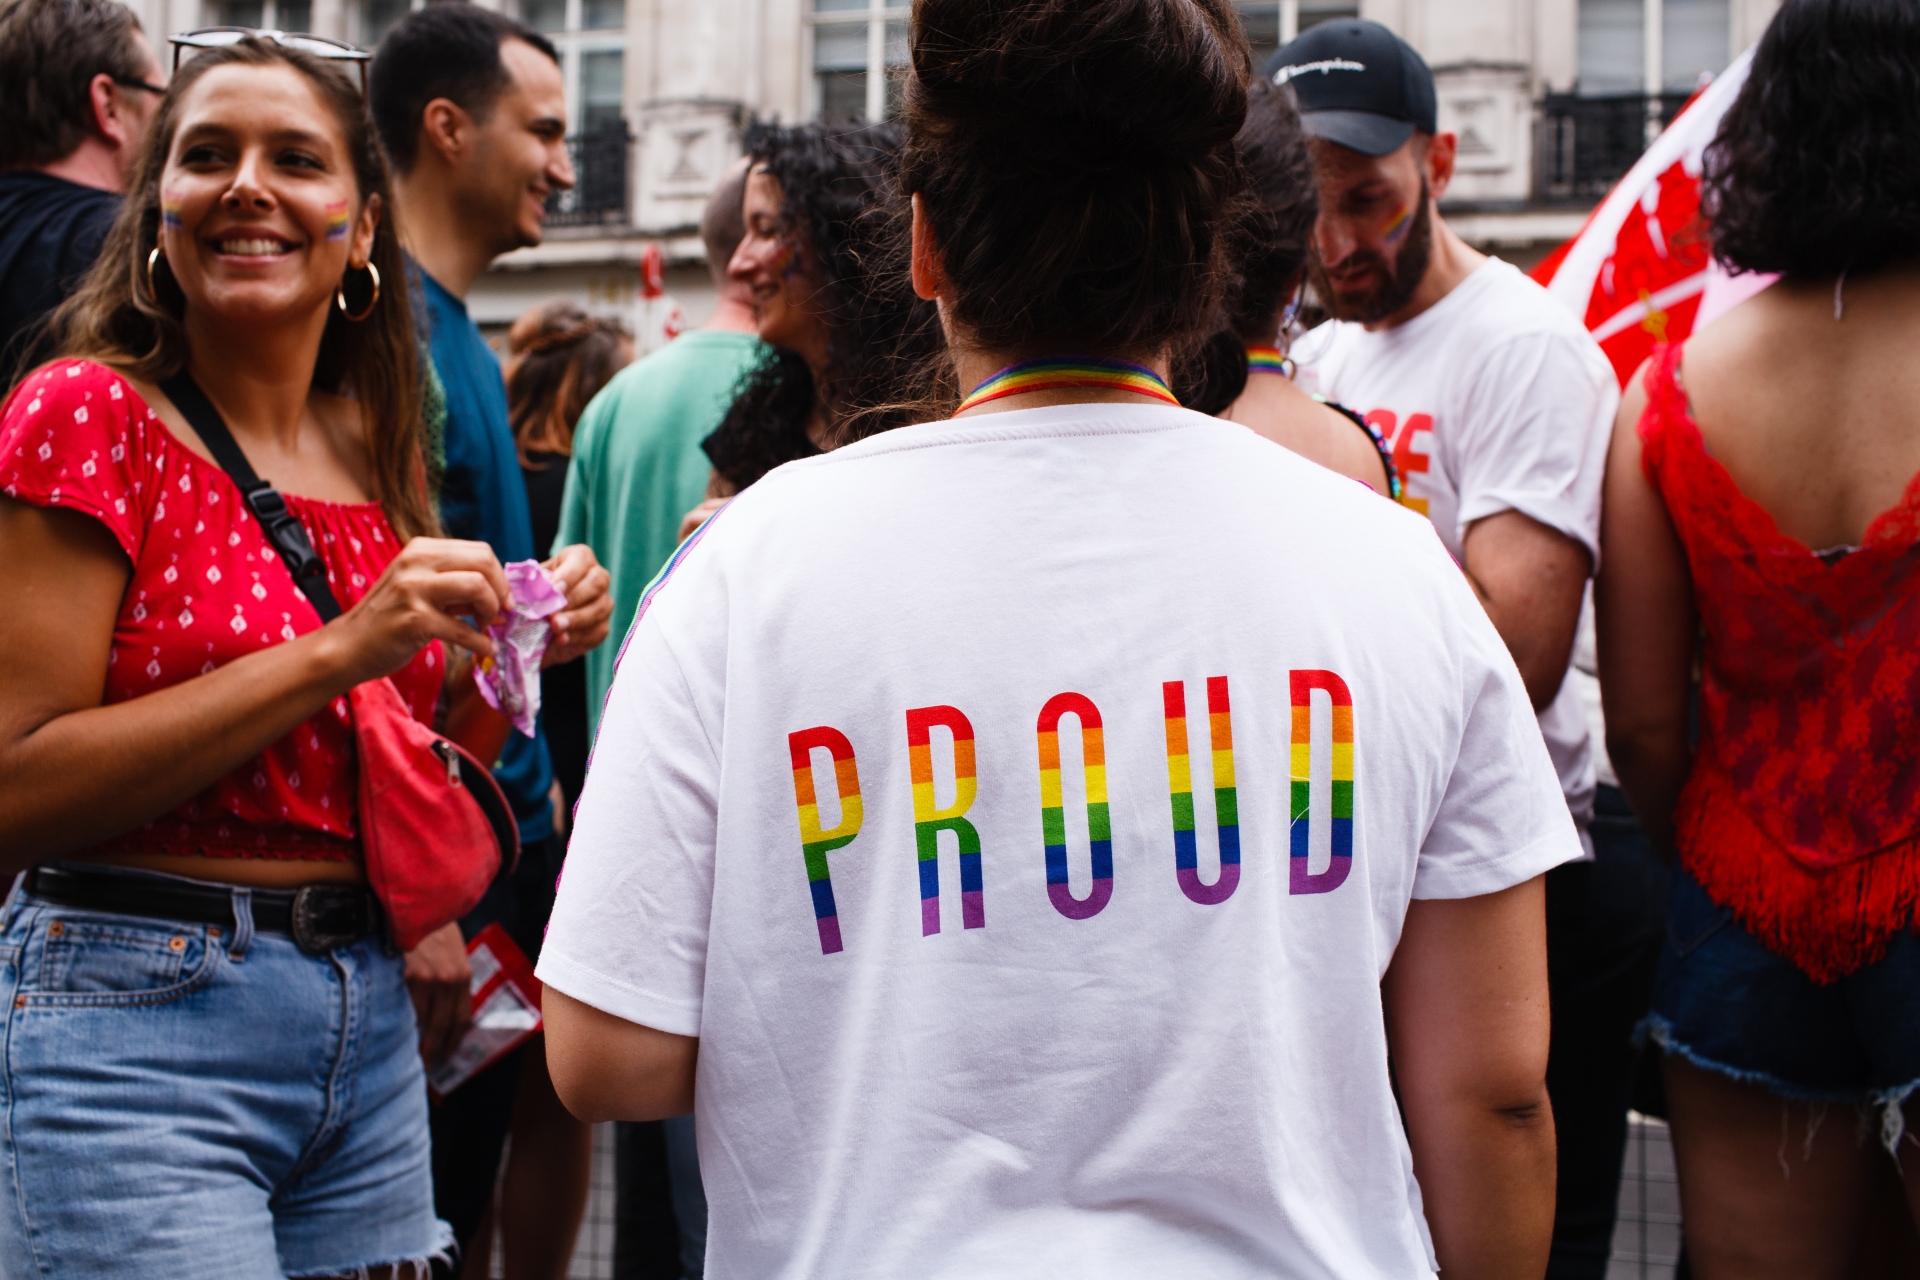 Thanks to those first fighters, today the LGBTQ+ community is open and empowered 